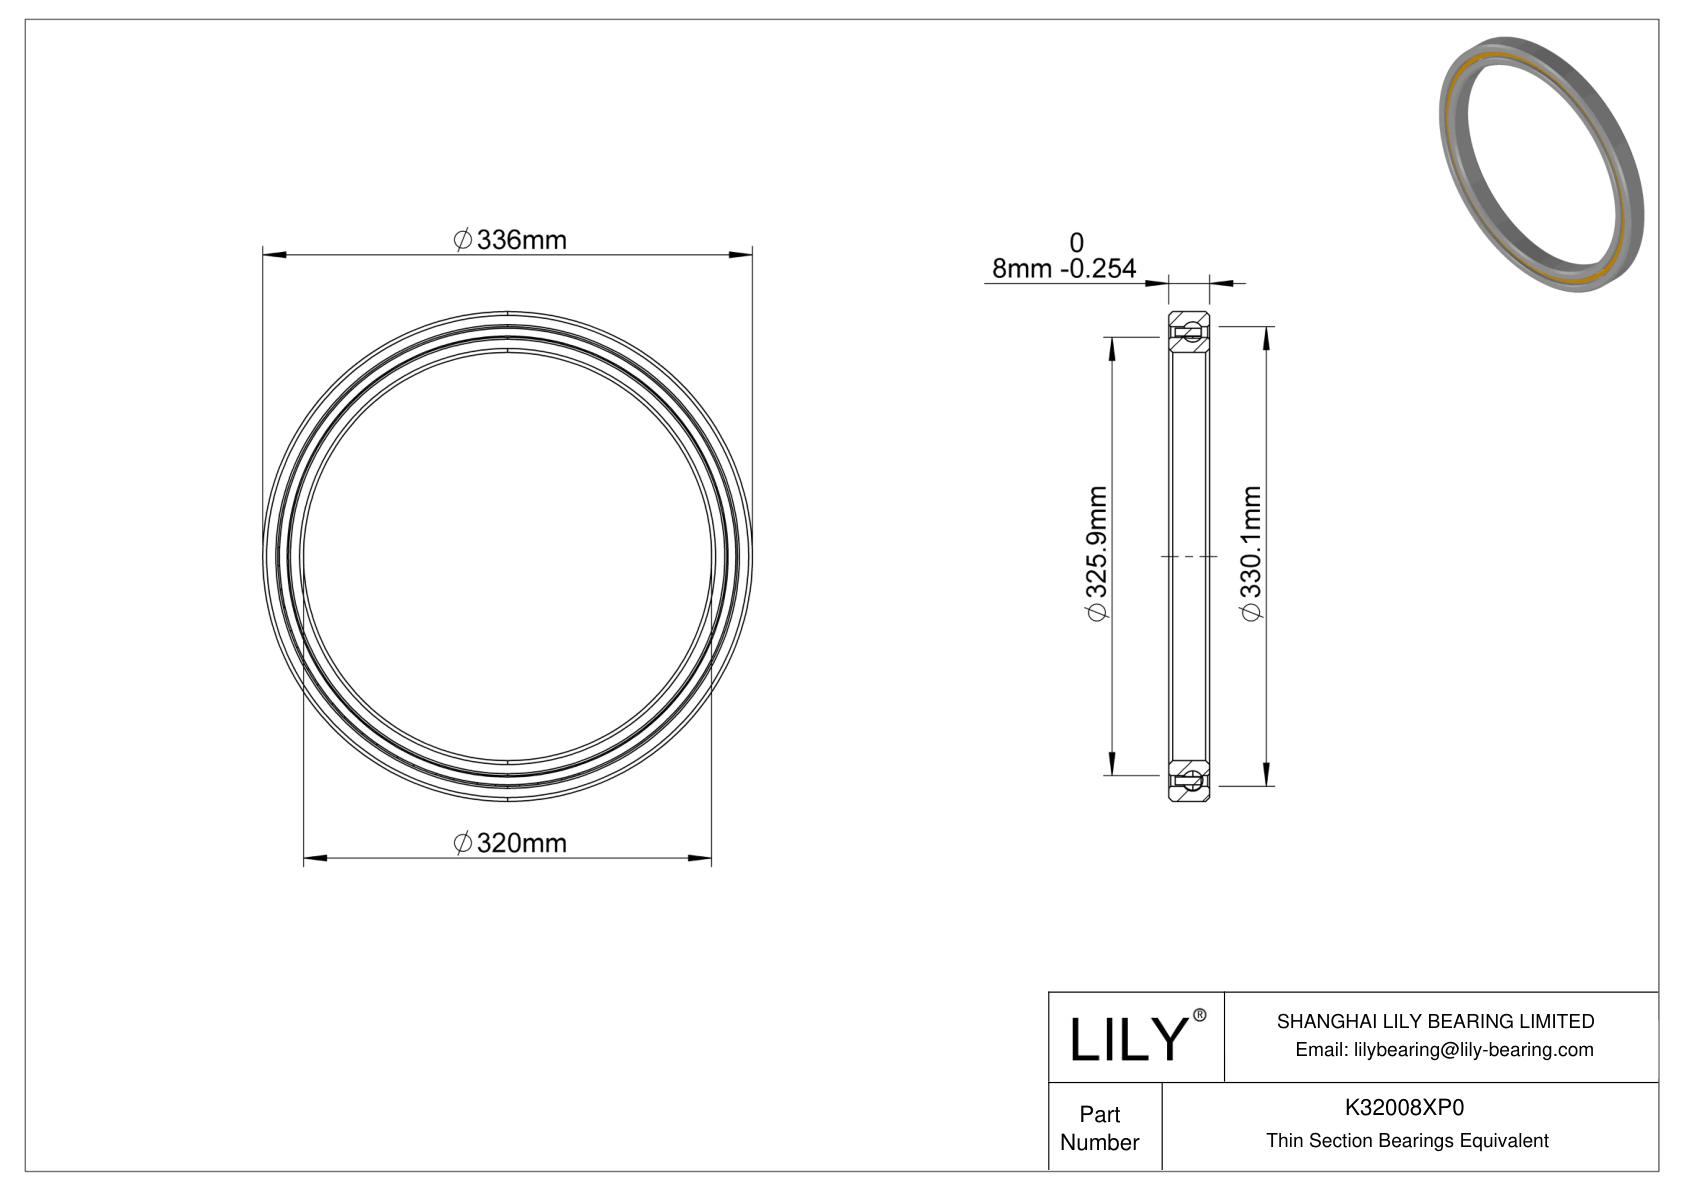 K32008XP0 Constant Section (CS) Bearings cad drawing